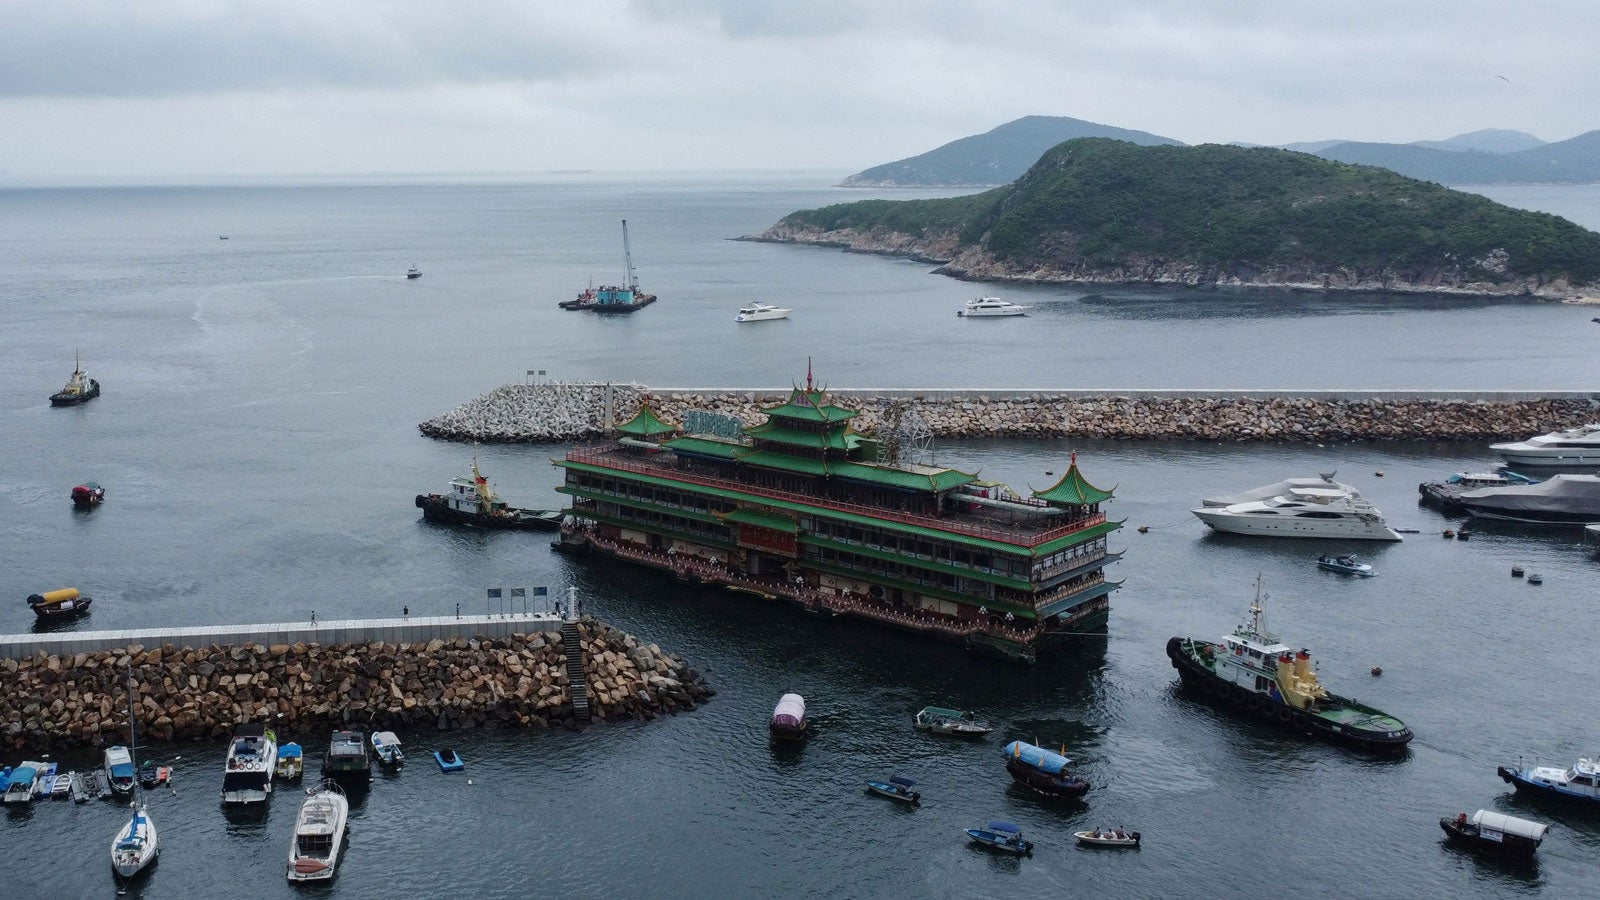 ICYMI: Hong Kong’s Jumbo Kingdom Floating Restaurant Sinks While Being Towed to Sea